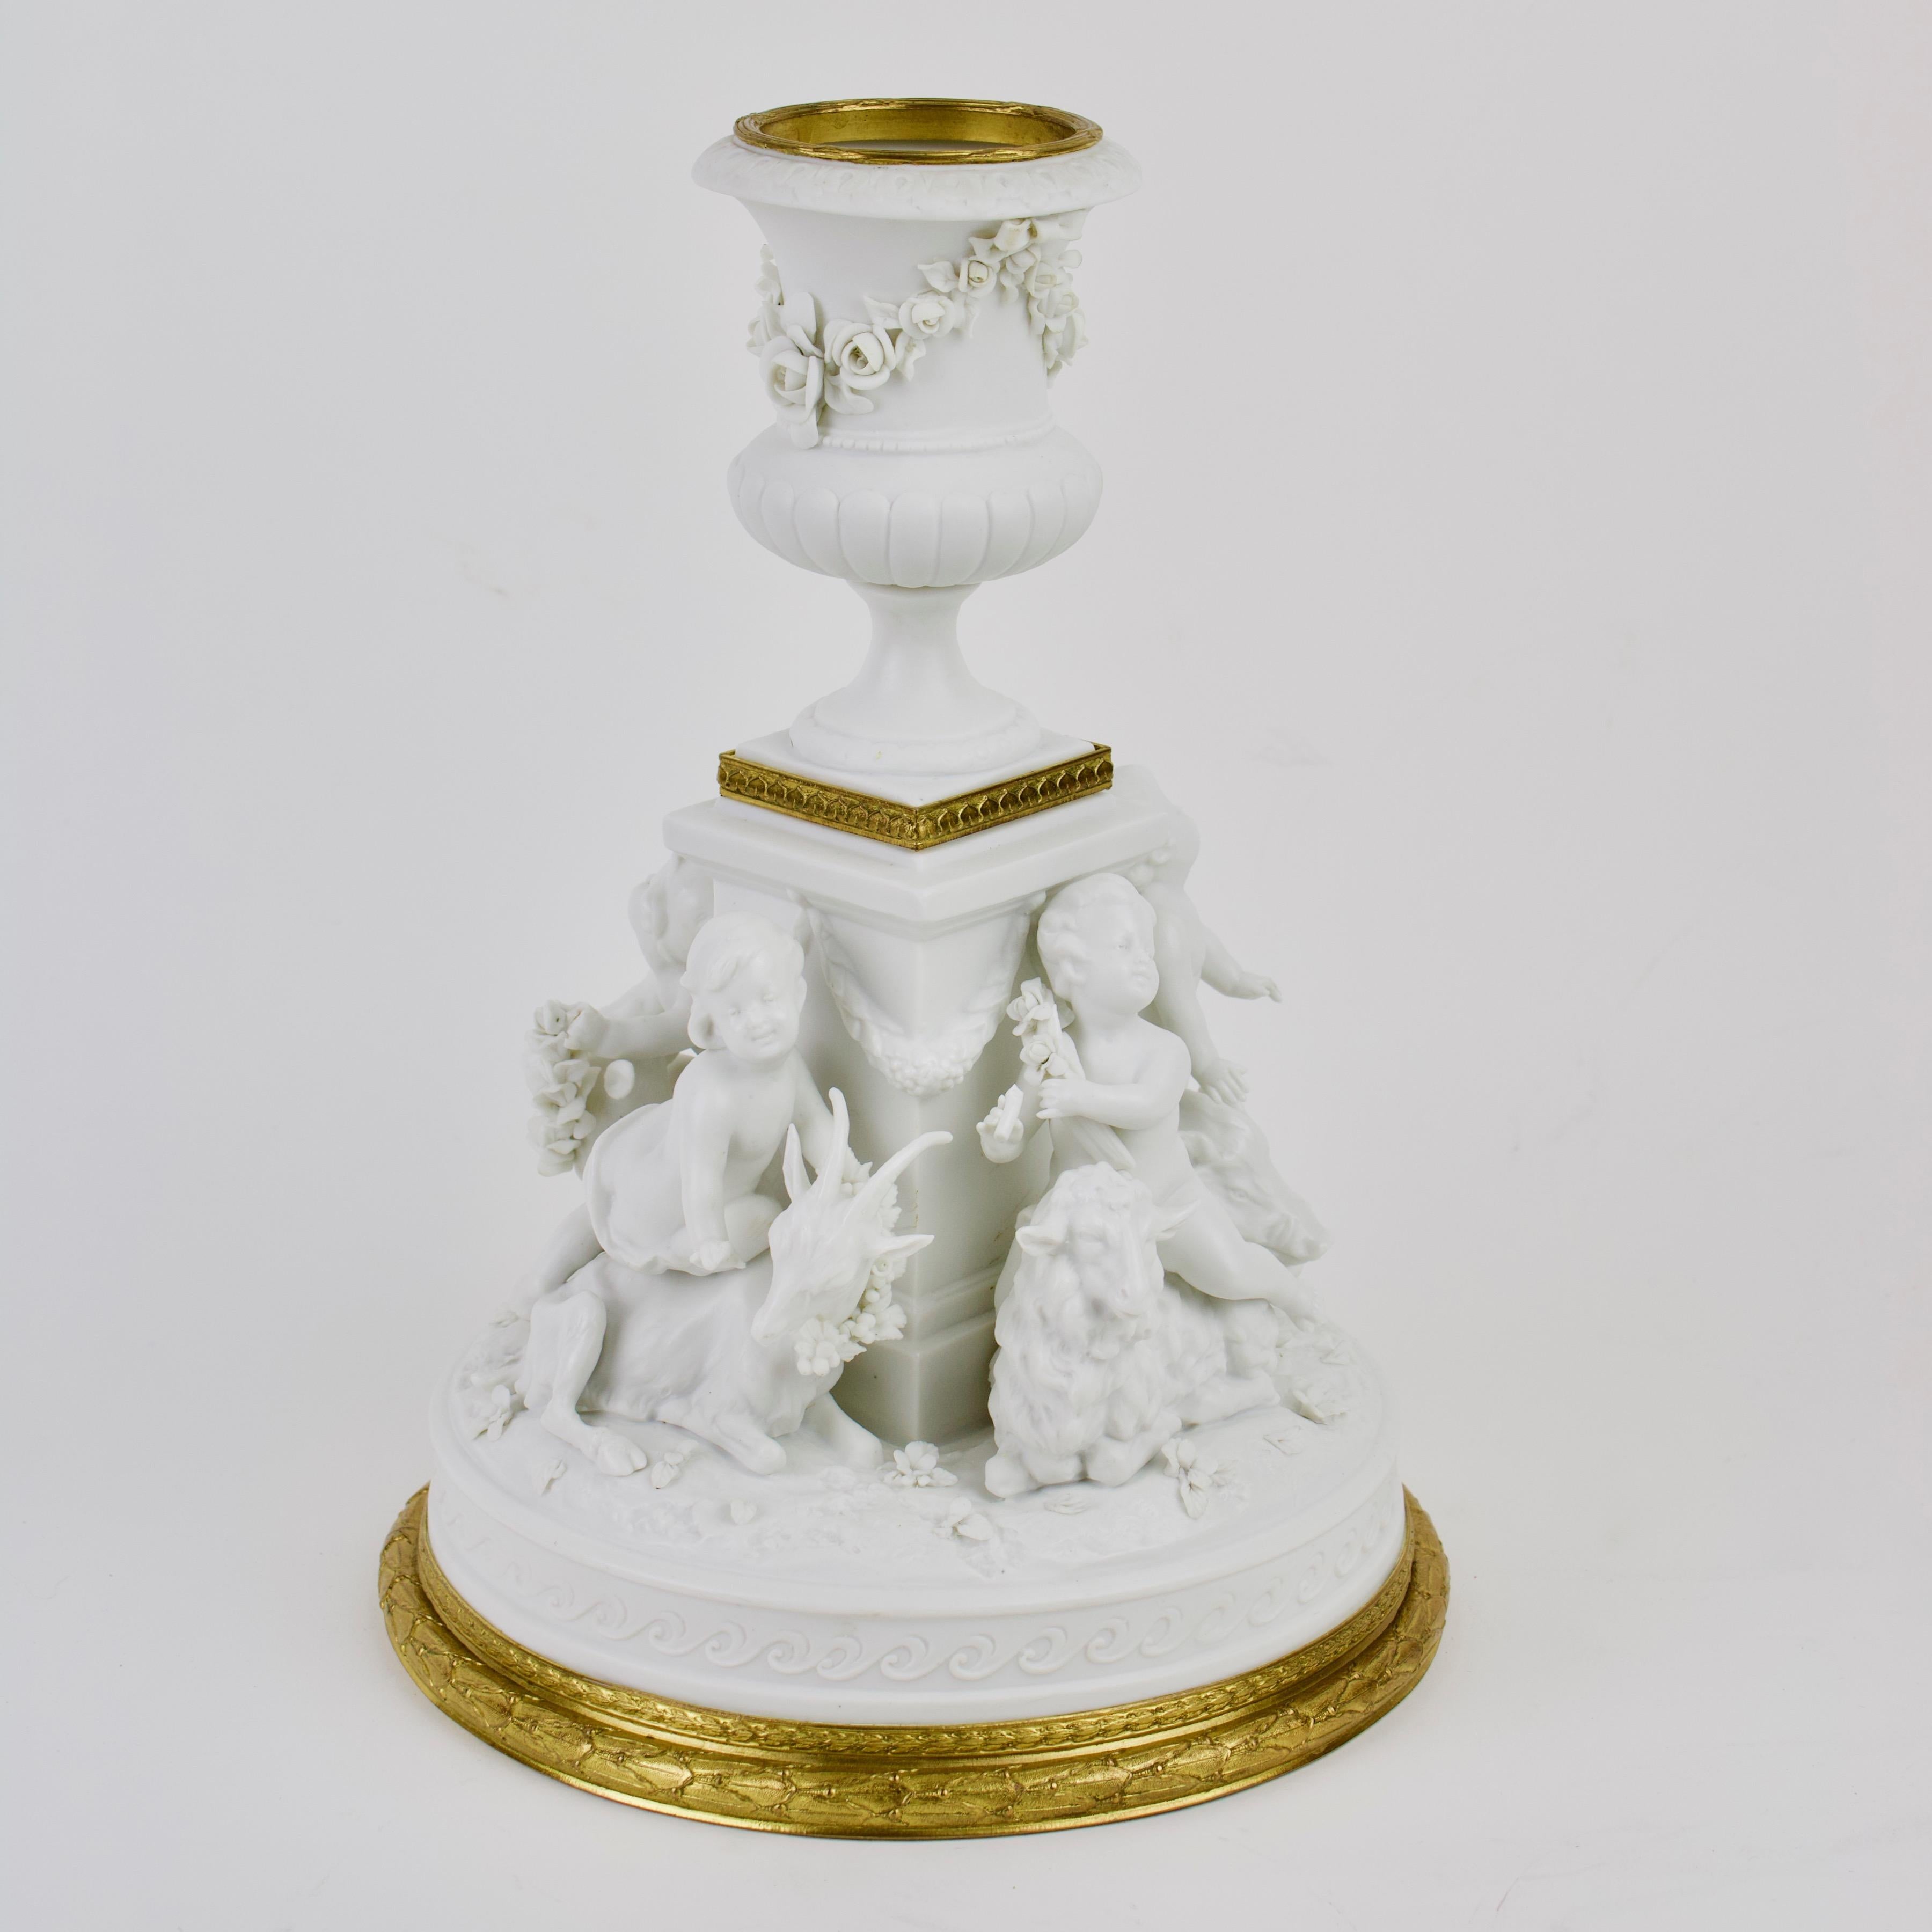 German/Rudolstadt-Volkstedt late 19th century figure group of putti made of biscuit porcelain: 

Four putti on landscape round pedestal around a vase pedestal, in moving posture and different states of mind playing with a goat, a sheep, a boar and